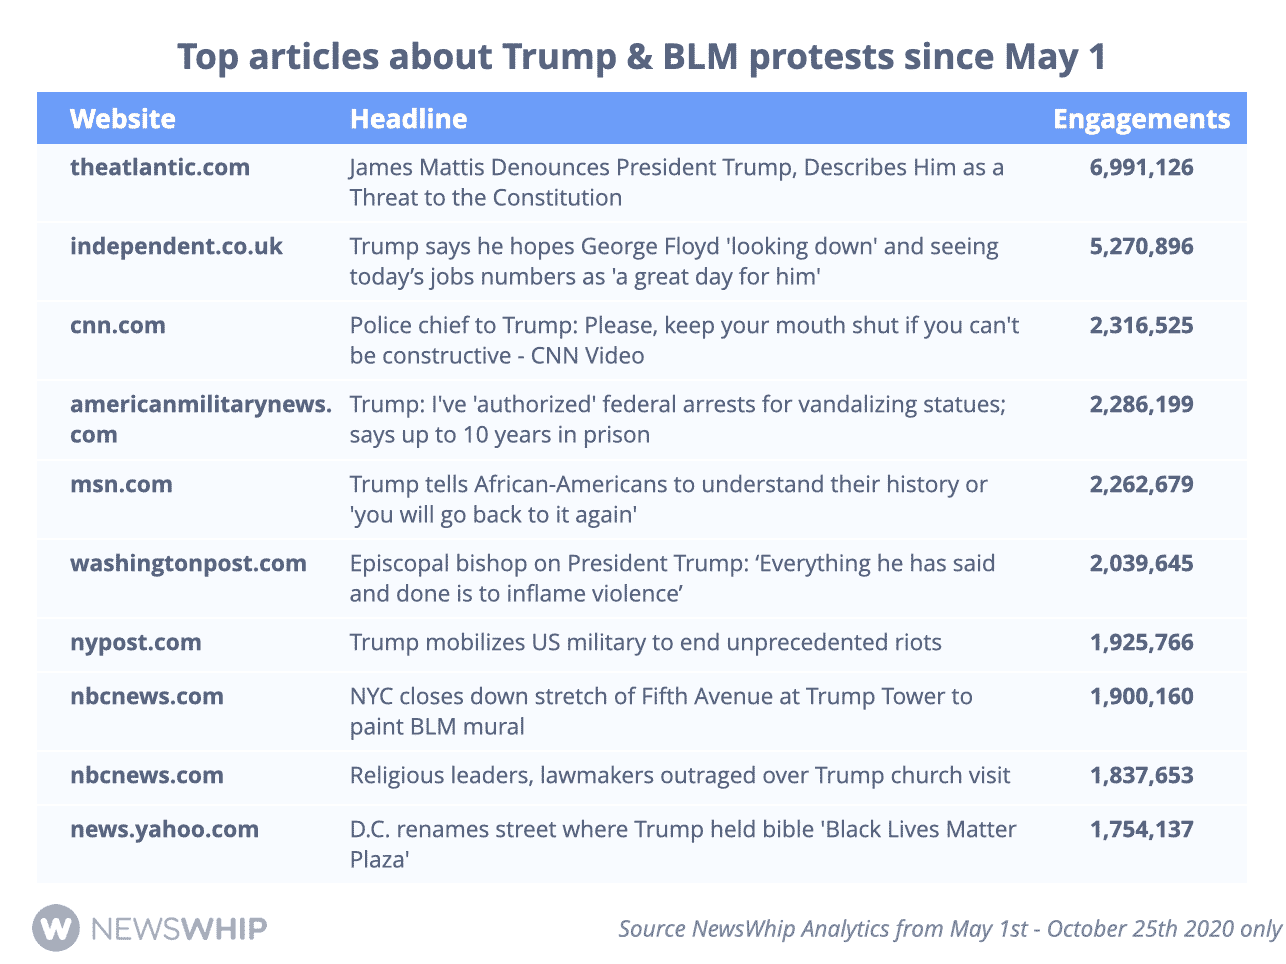 Chart showing the most engaged stories about President Trump and BLM in 2020, ranked by engagement